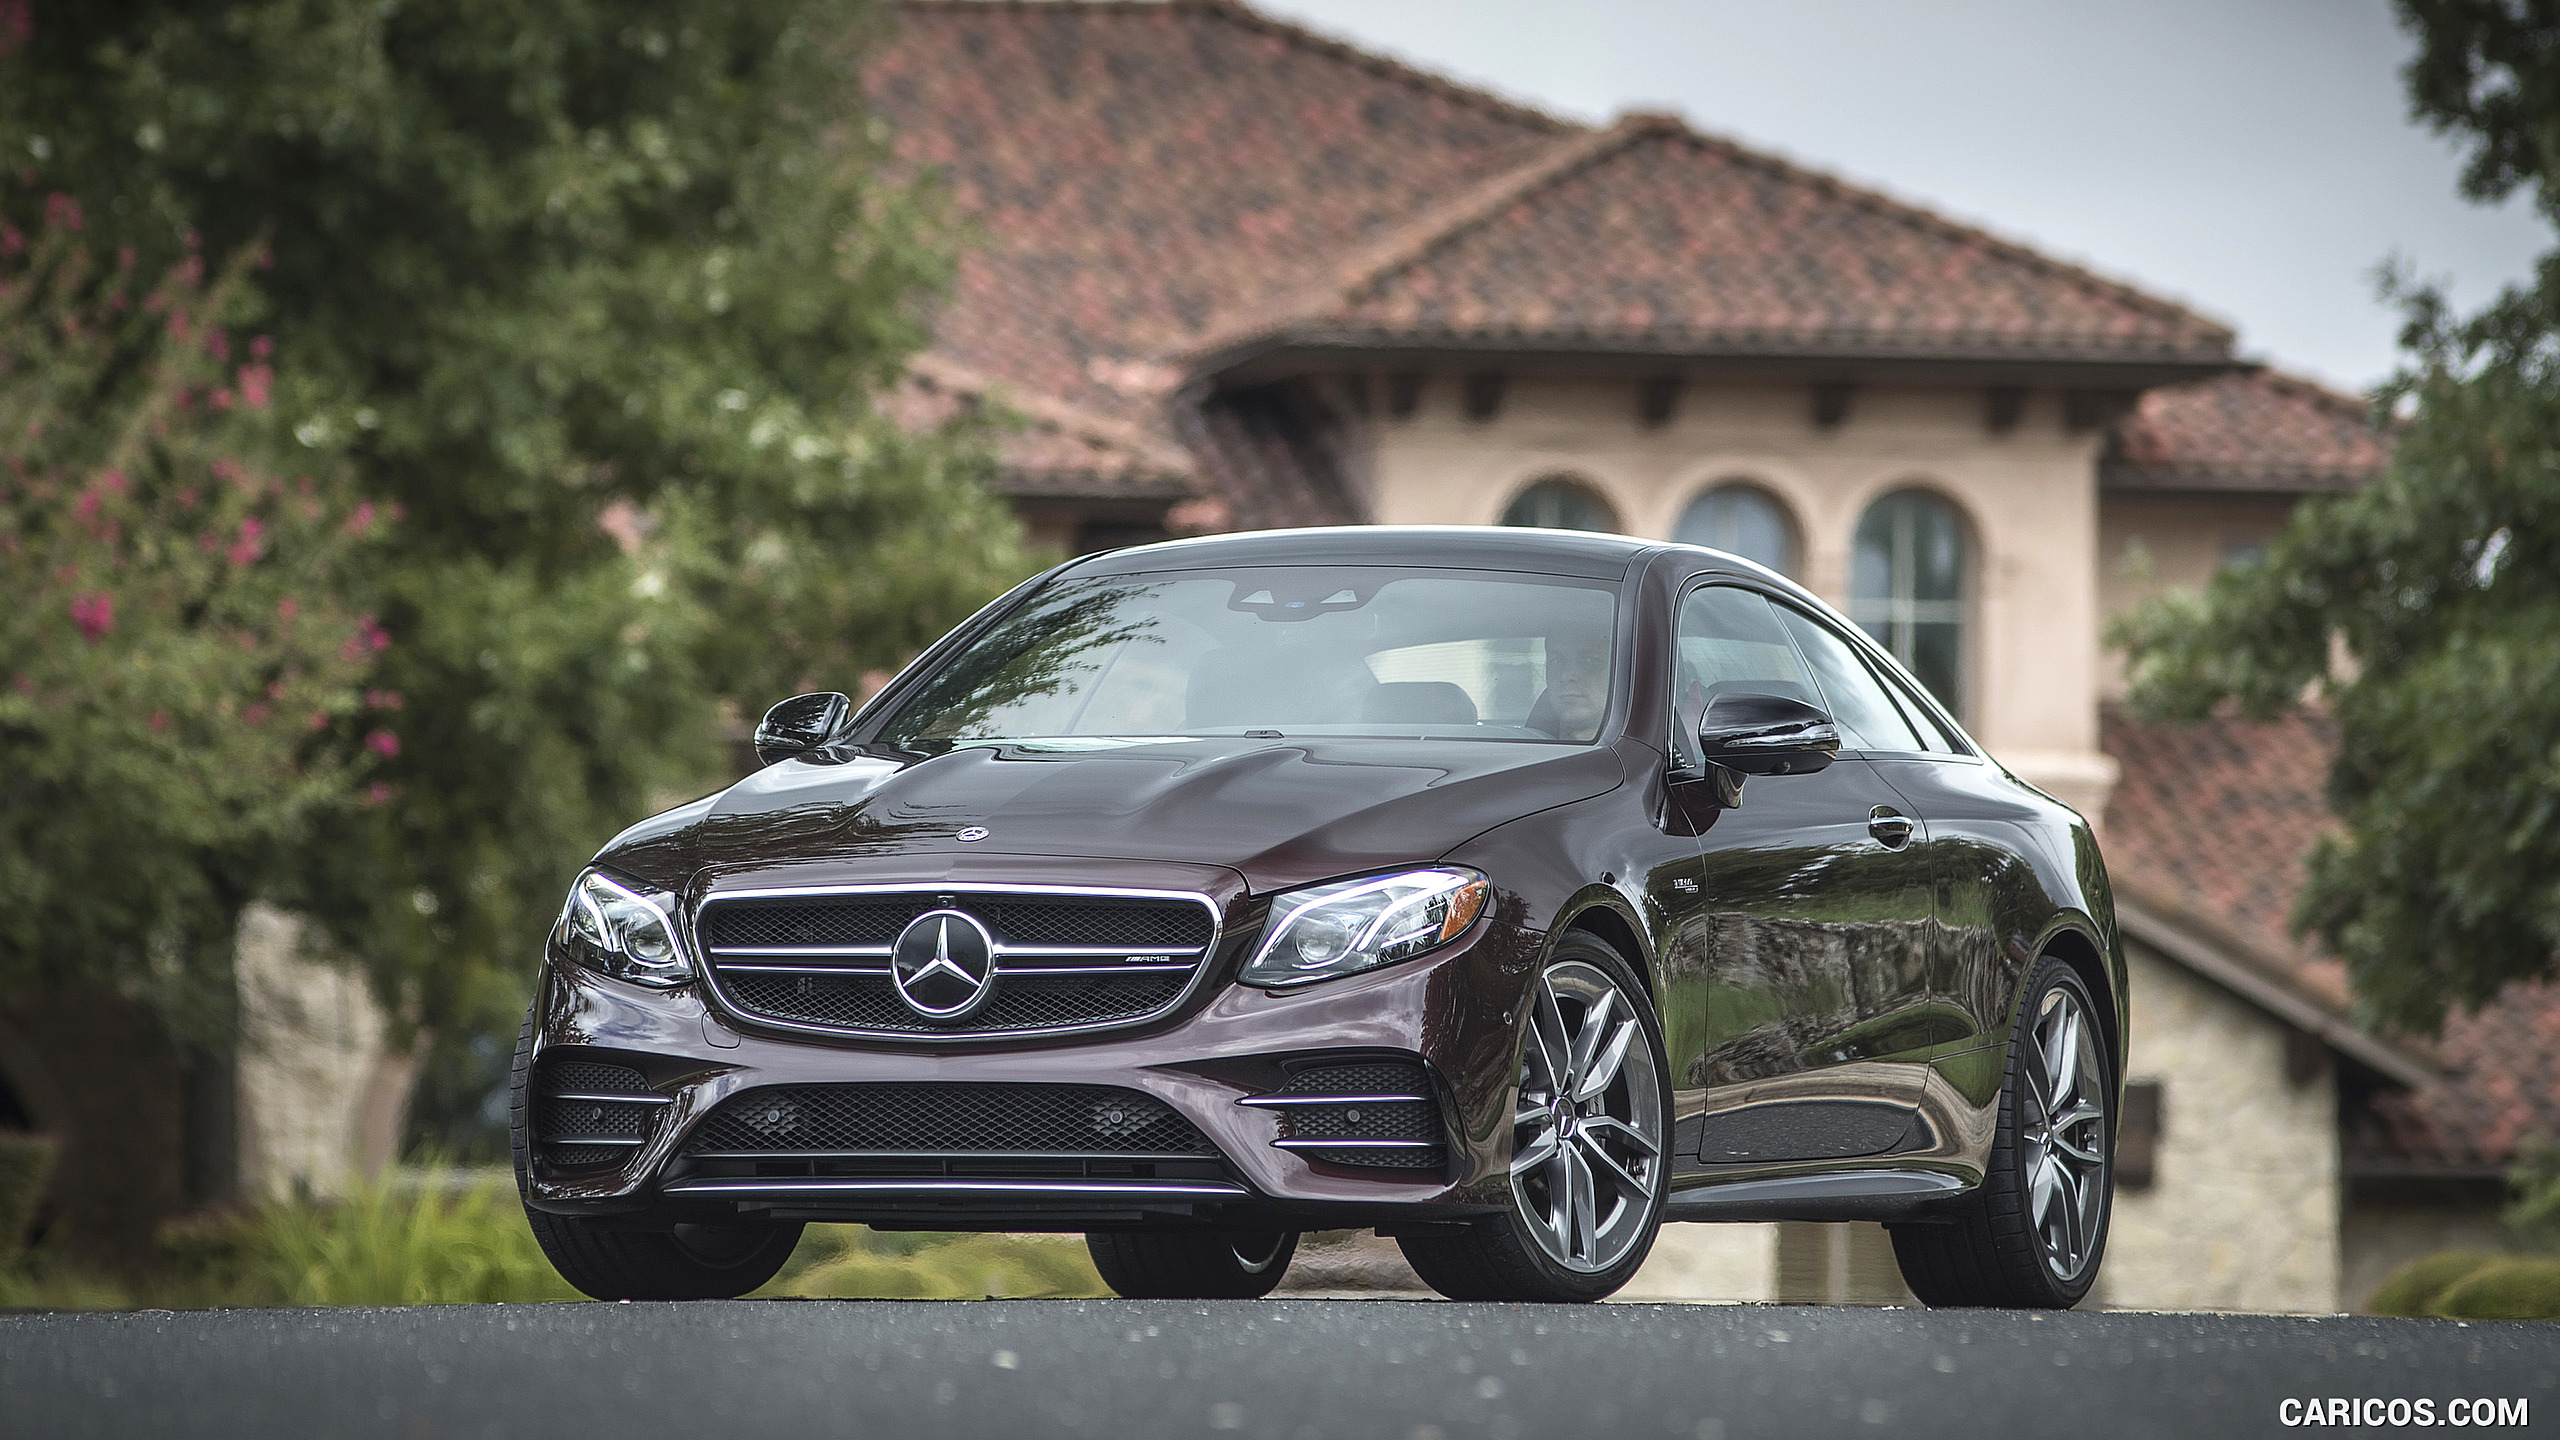 2019 Mercedes-AMG E 53 4MATIC+ Coupe (US-Spec) Wallpaper - Front, #149 of 193